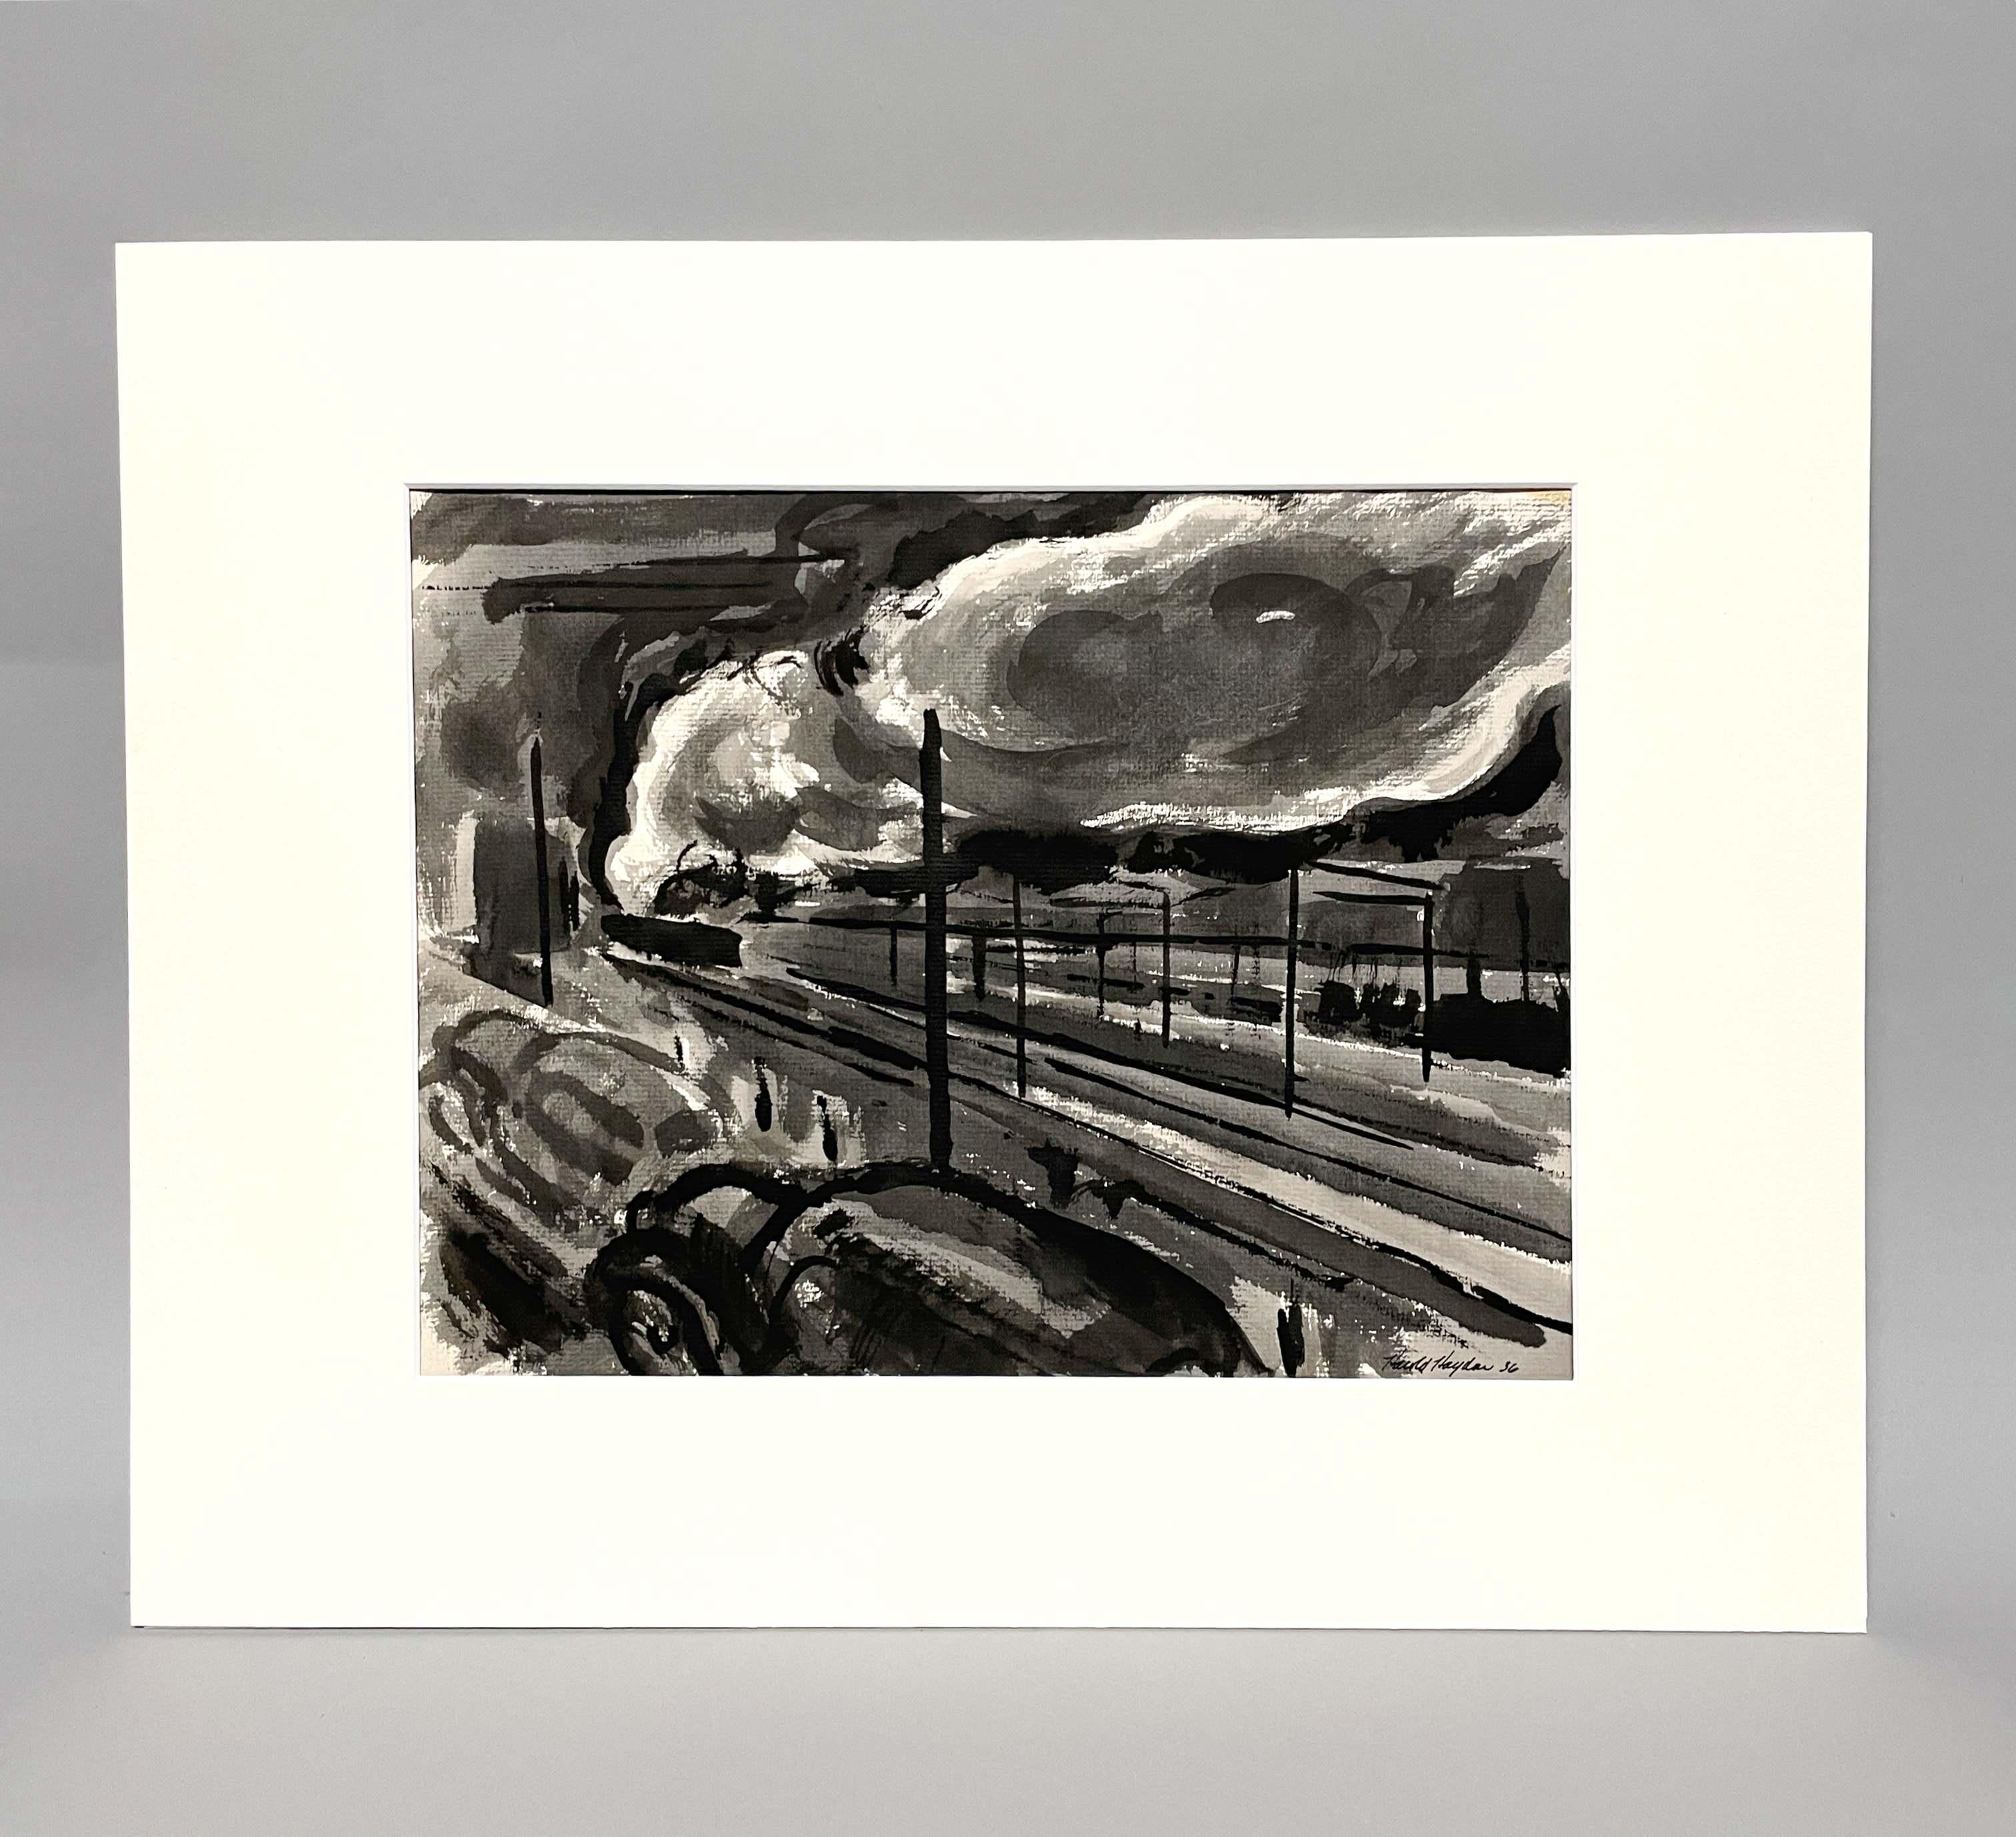 A 1936 ink on paper drawing of a rail yard by artist Harold Haydon.

Harold Emerson Haydon was born in Fort William, Ontario, Canada in 1909.   Haydon came to Chicago with his family in 1917 and became a naturalized American citizen in 1941.  He